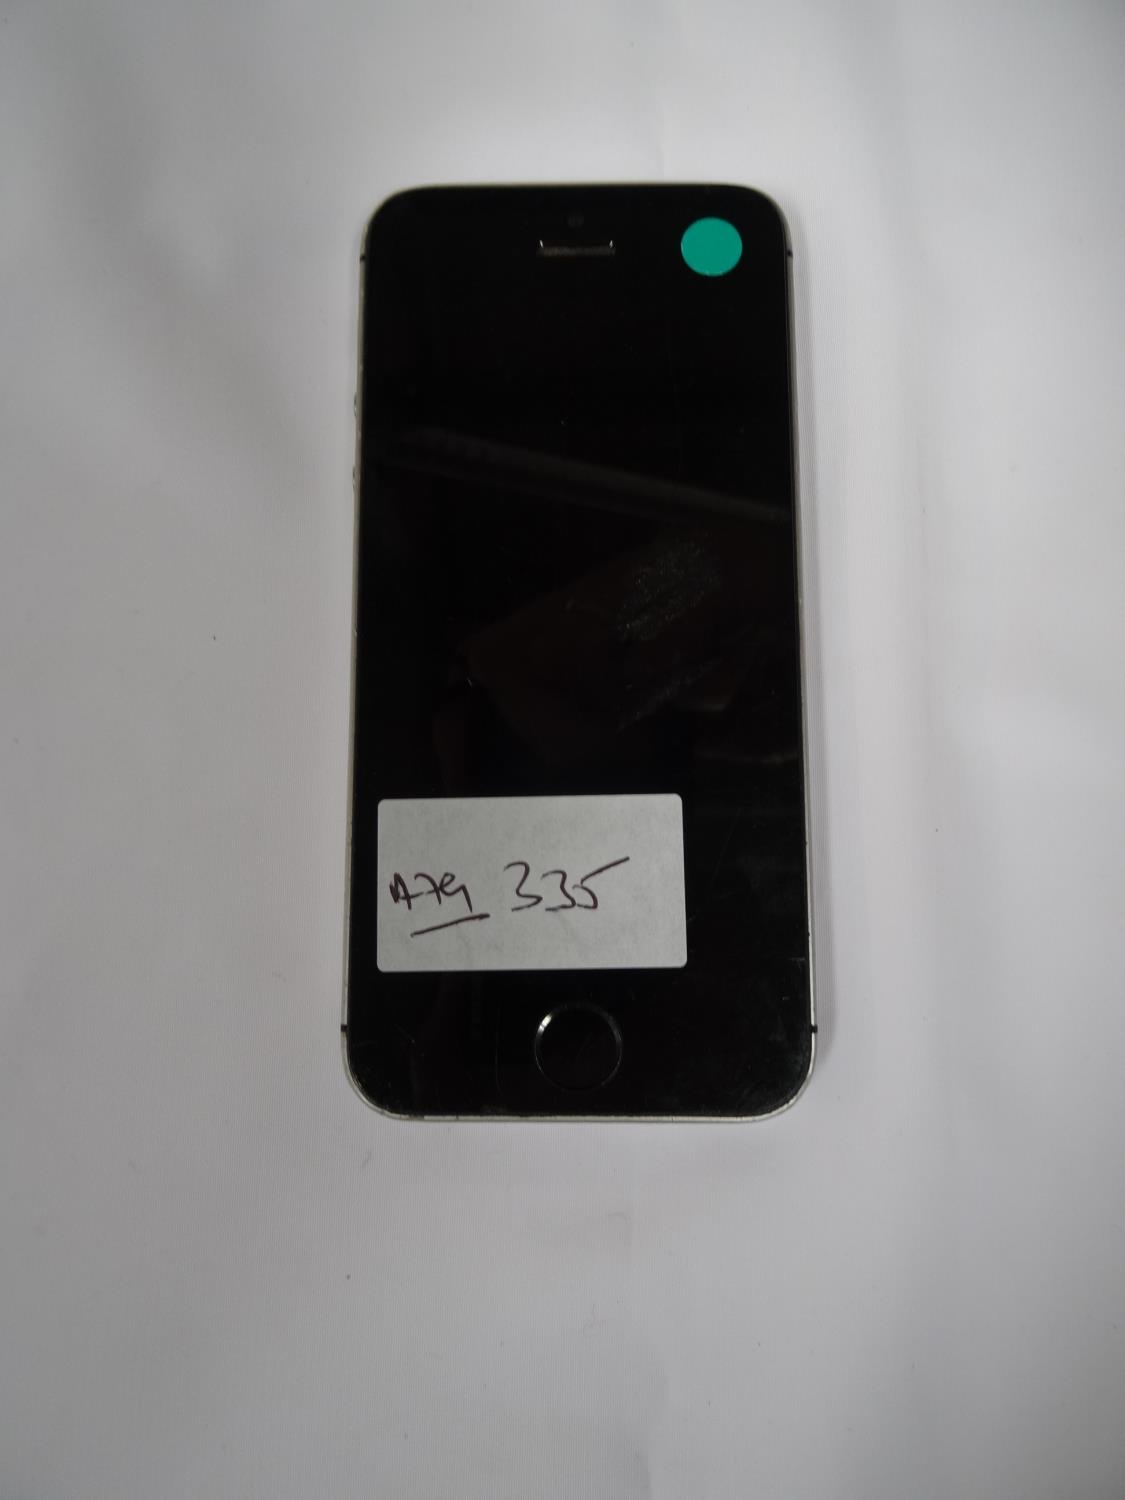 Apple Iphone Se Model A1723 Imei Not I Cloud Protected Note It Is The Buyer